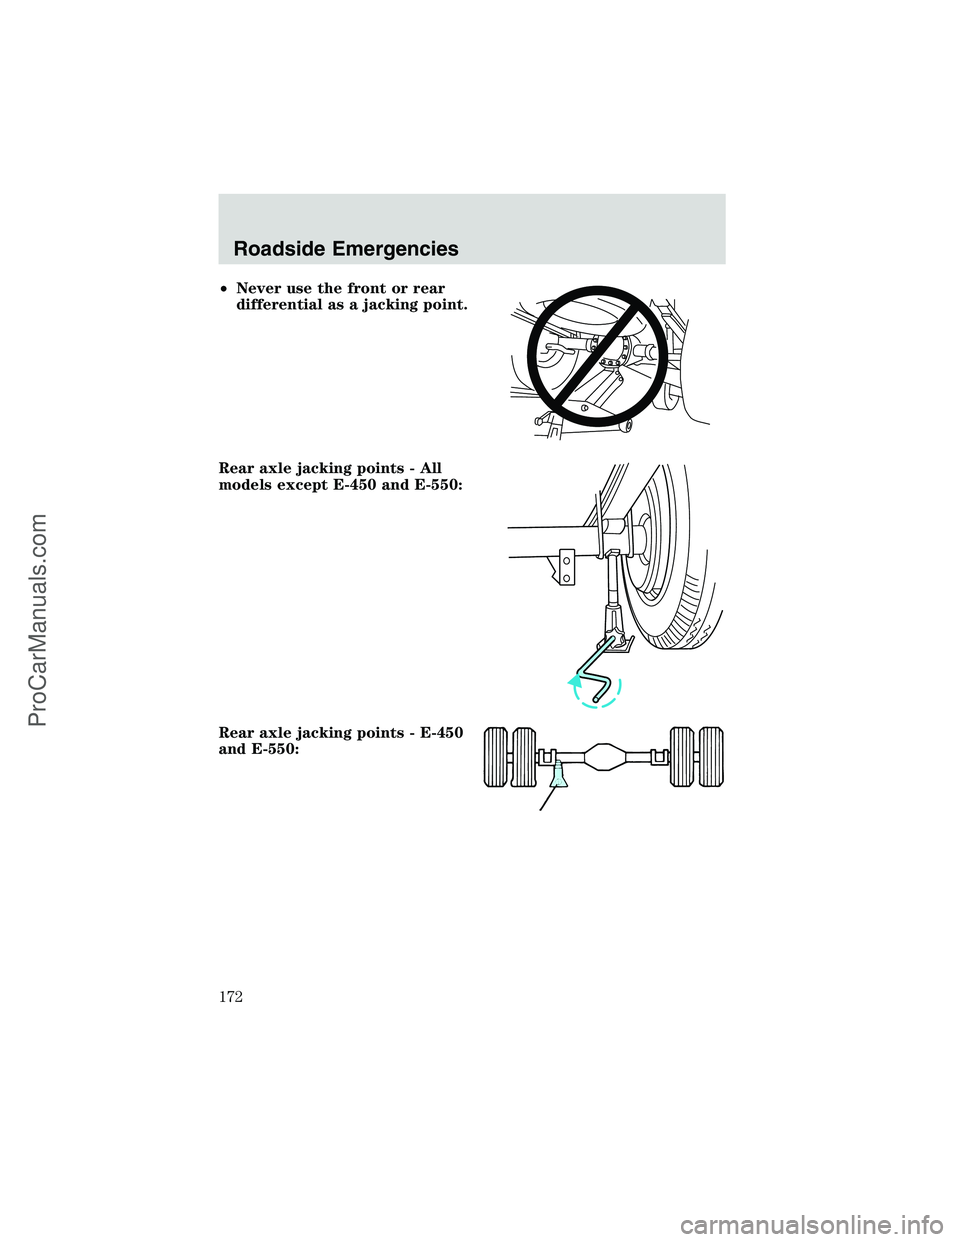 FORD E-350 2002  Owners Manual •Never use the front or rear
differential as a jacking point.
Rear axle jacking points - All
models except E-450 and E-550:
Rear axle jacking points - E-450
and E-550:
Roadside Emergencies
172
ProCa